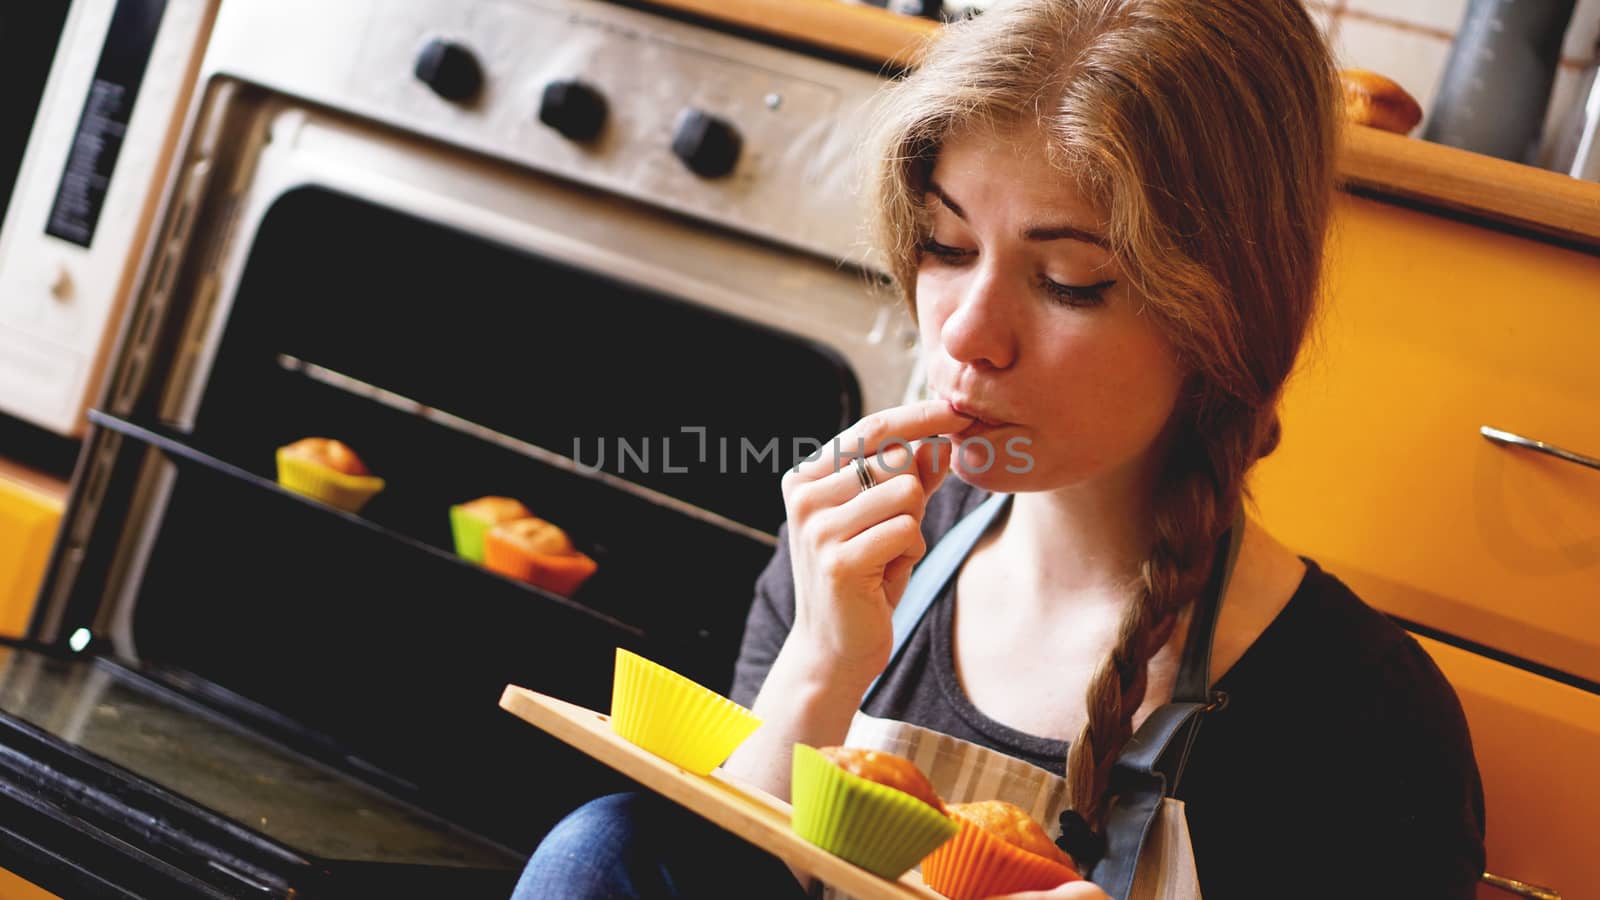 Beautiful blonde woman showing muffins while eating one in a kitchen. Cooking and home concept